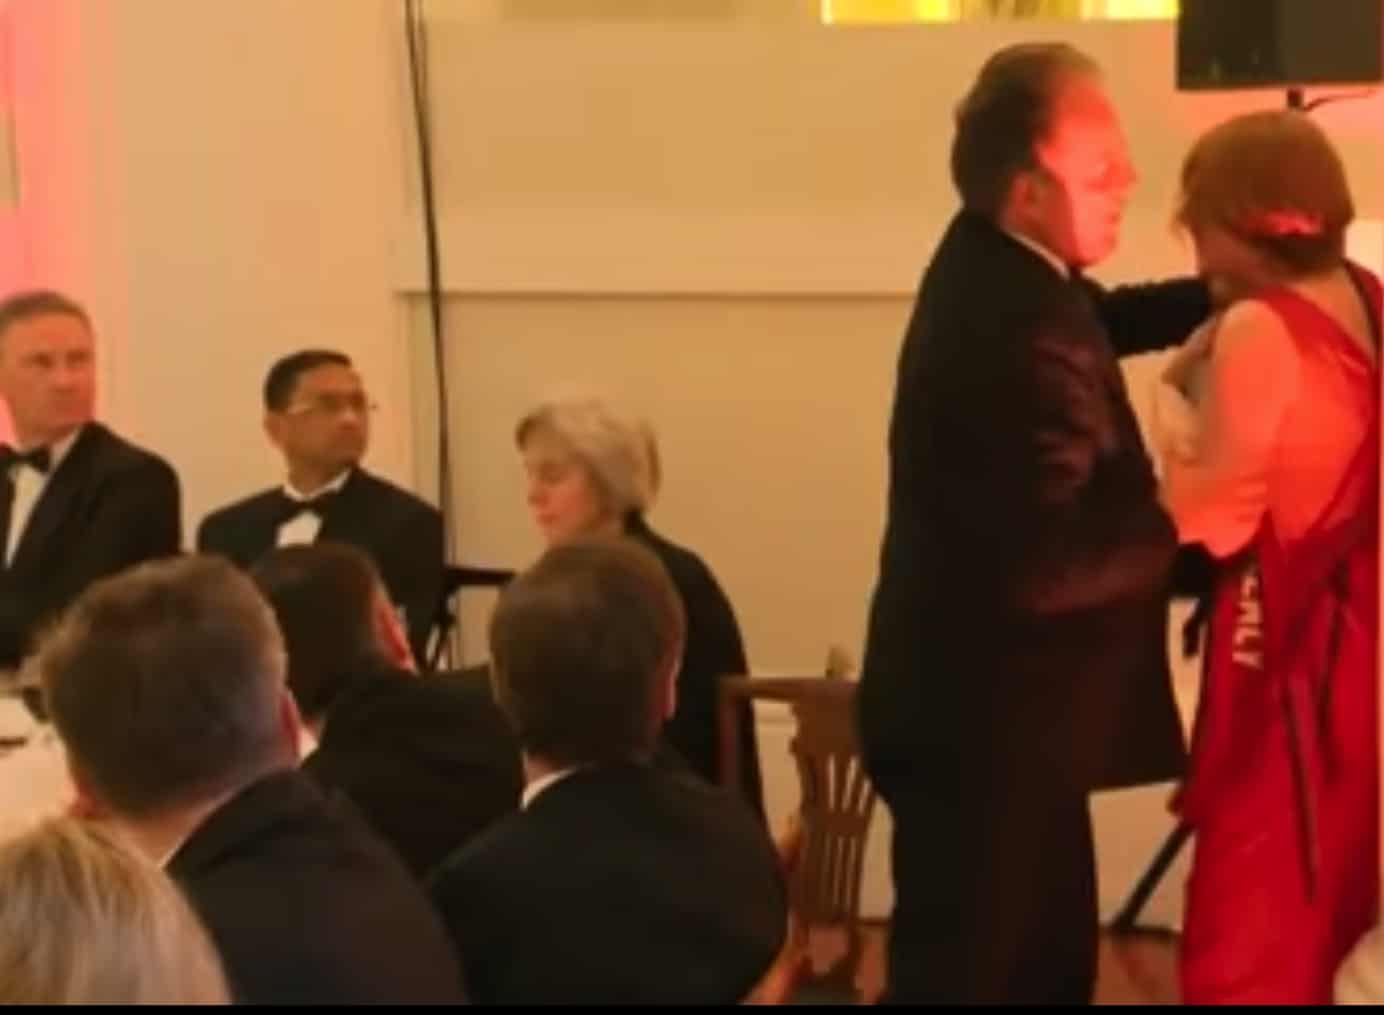 Video of Mark Field manhandling female protester resurfaces as Tories pledge to protect women